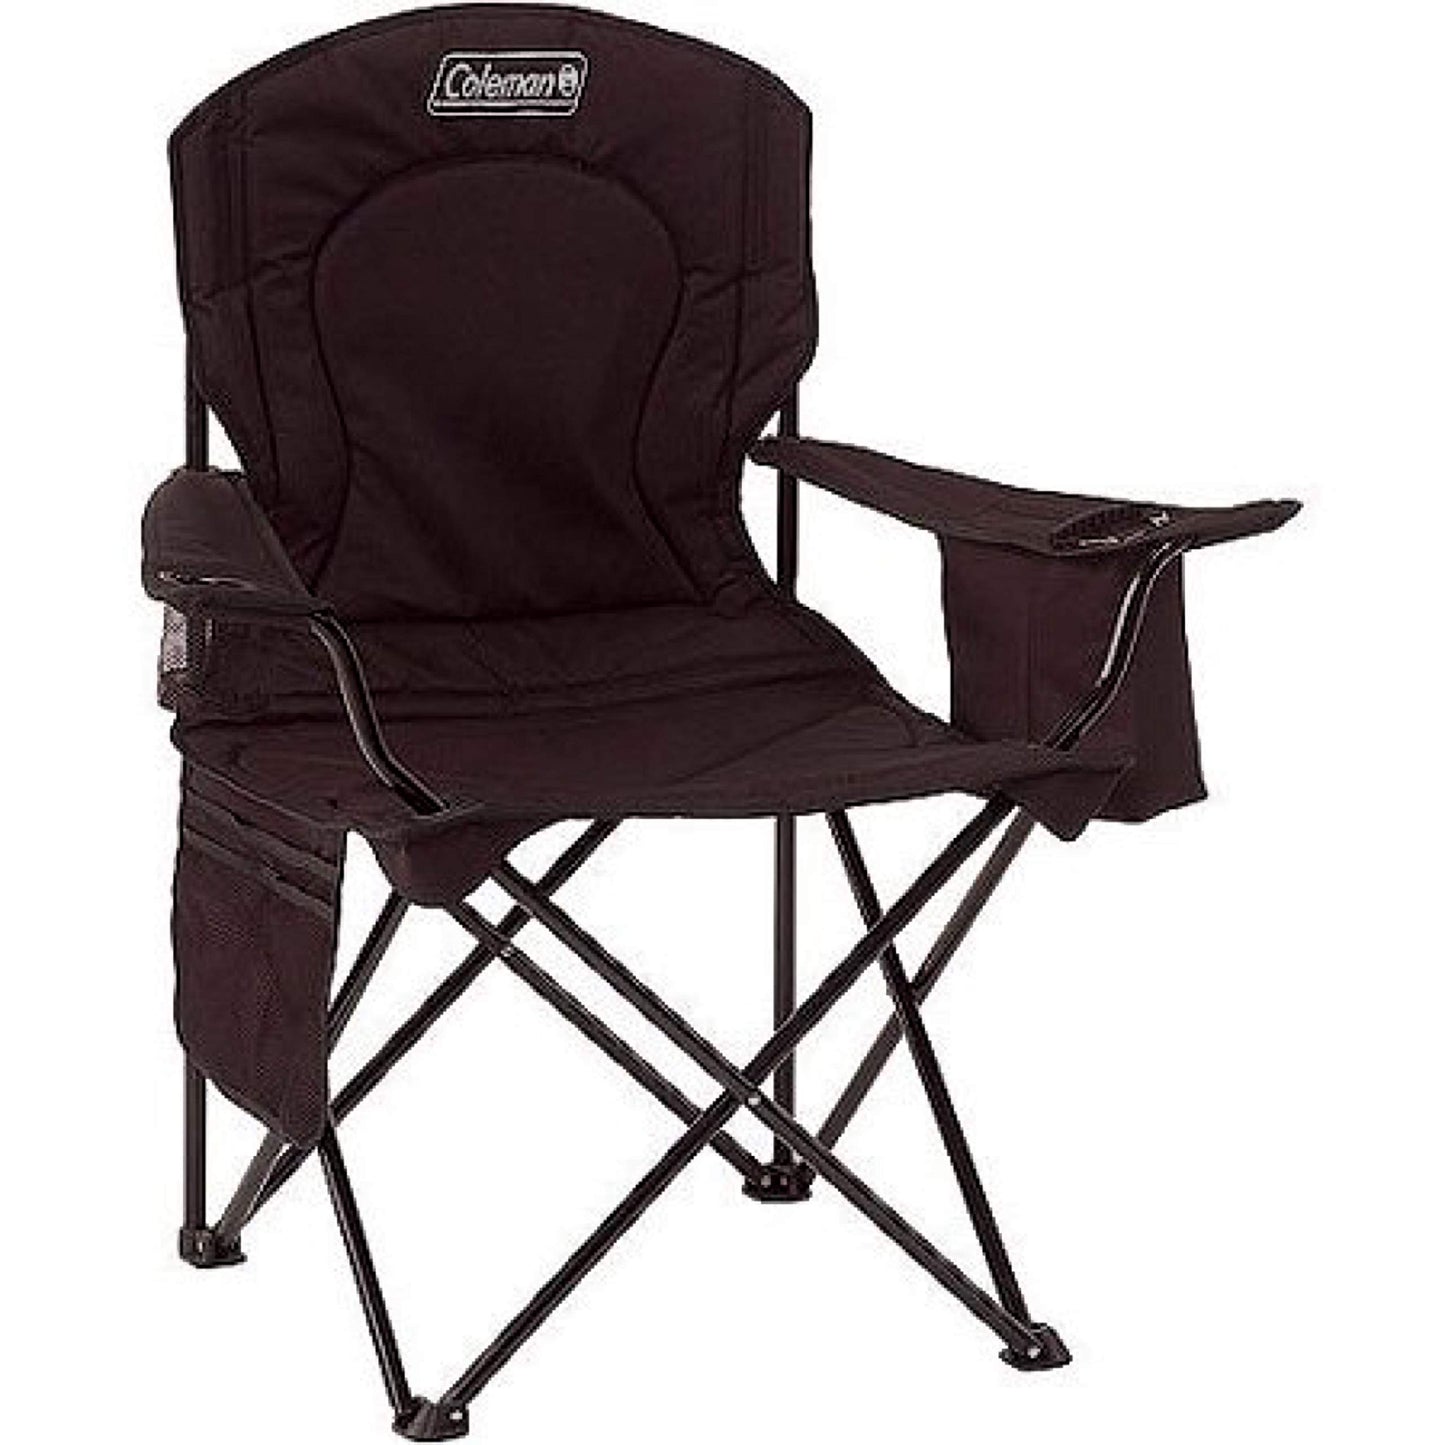 Coleman Camp Chair with 4-Can Cooler | Folding Beach Chair with Built in Drinks Cooler | Portable Quad Chair with Armrest Cooler for Tailgating, Camping & Outdoors, Black, Roomy seat: 24"